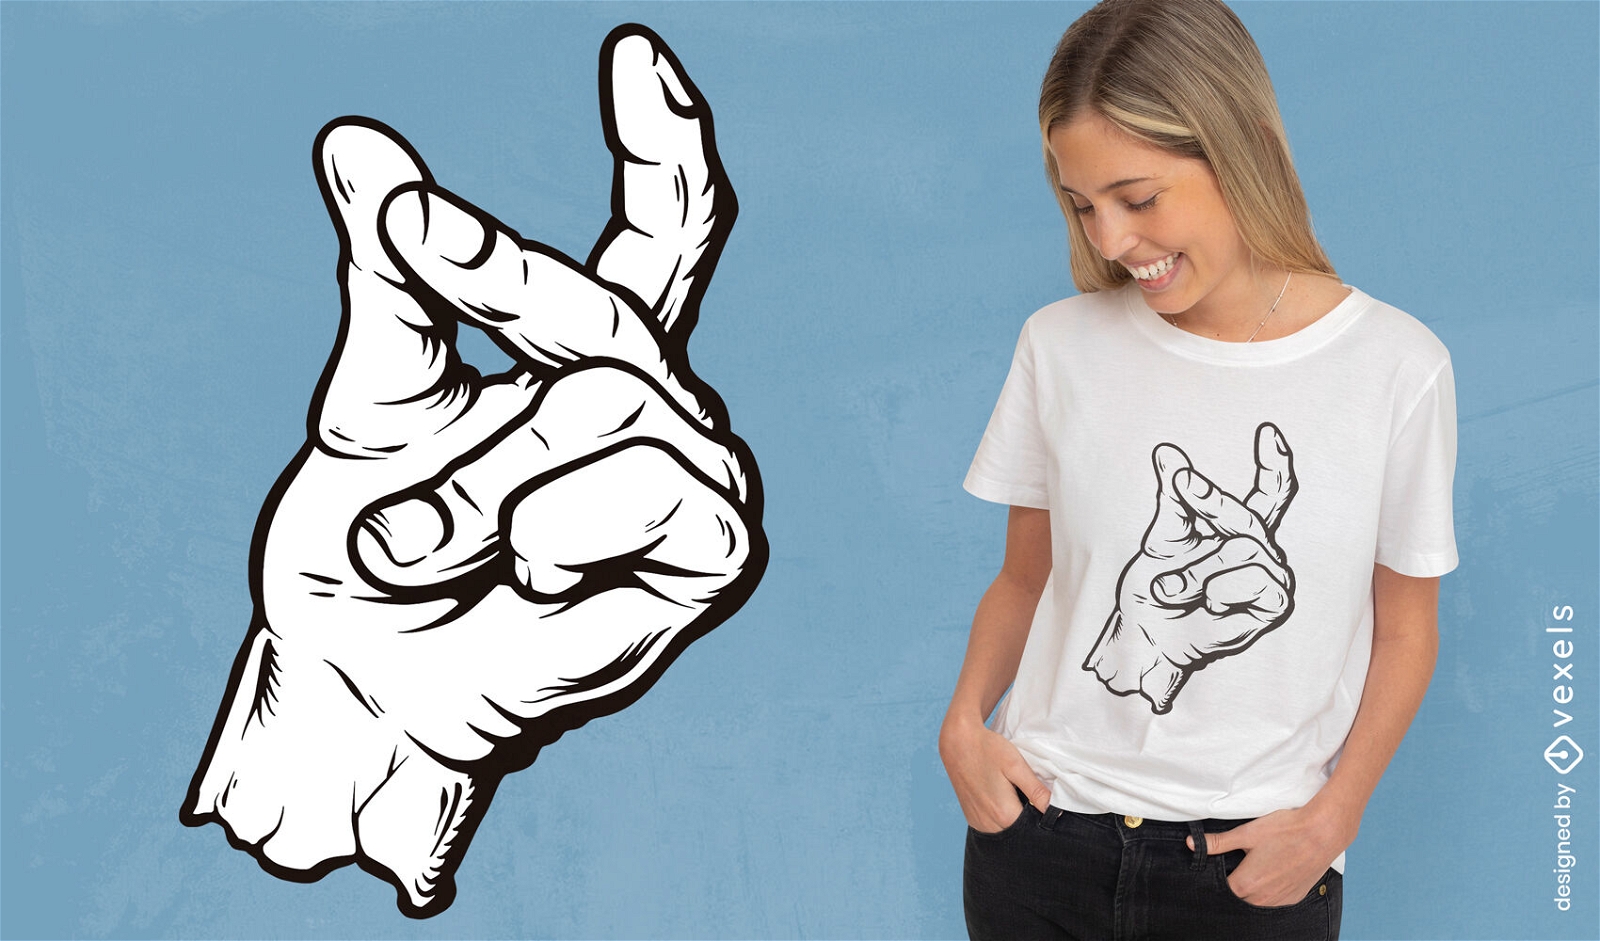 Hand snapping fingers t-shirt design